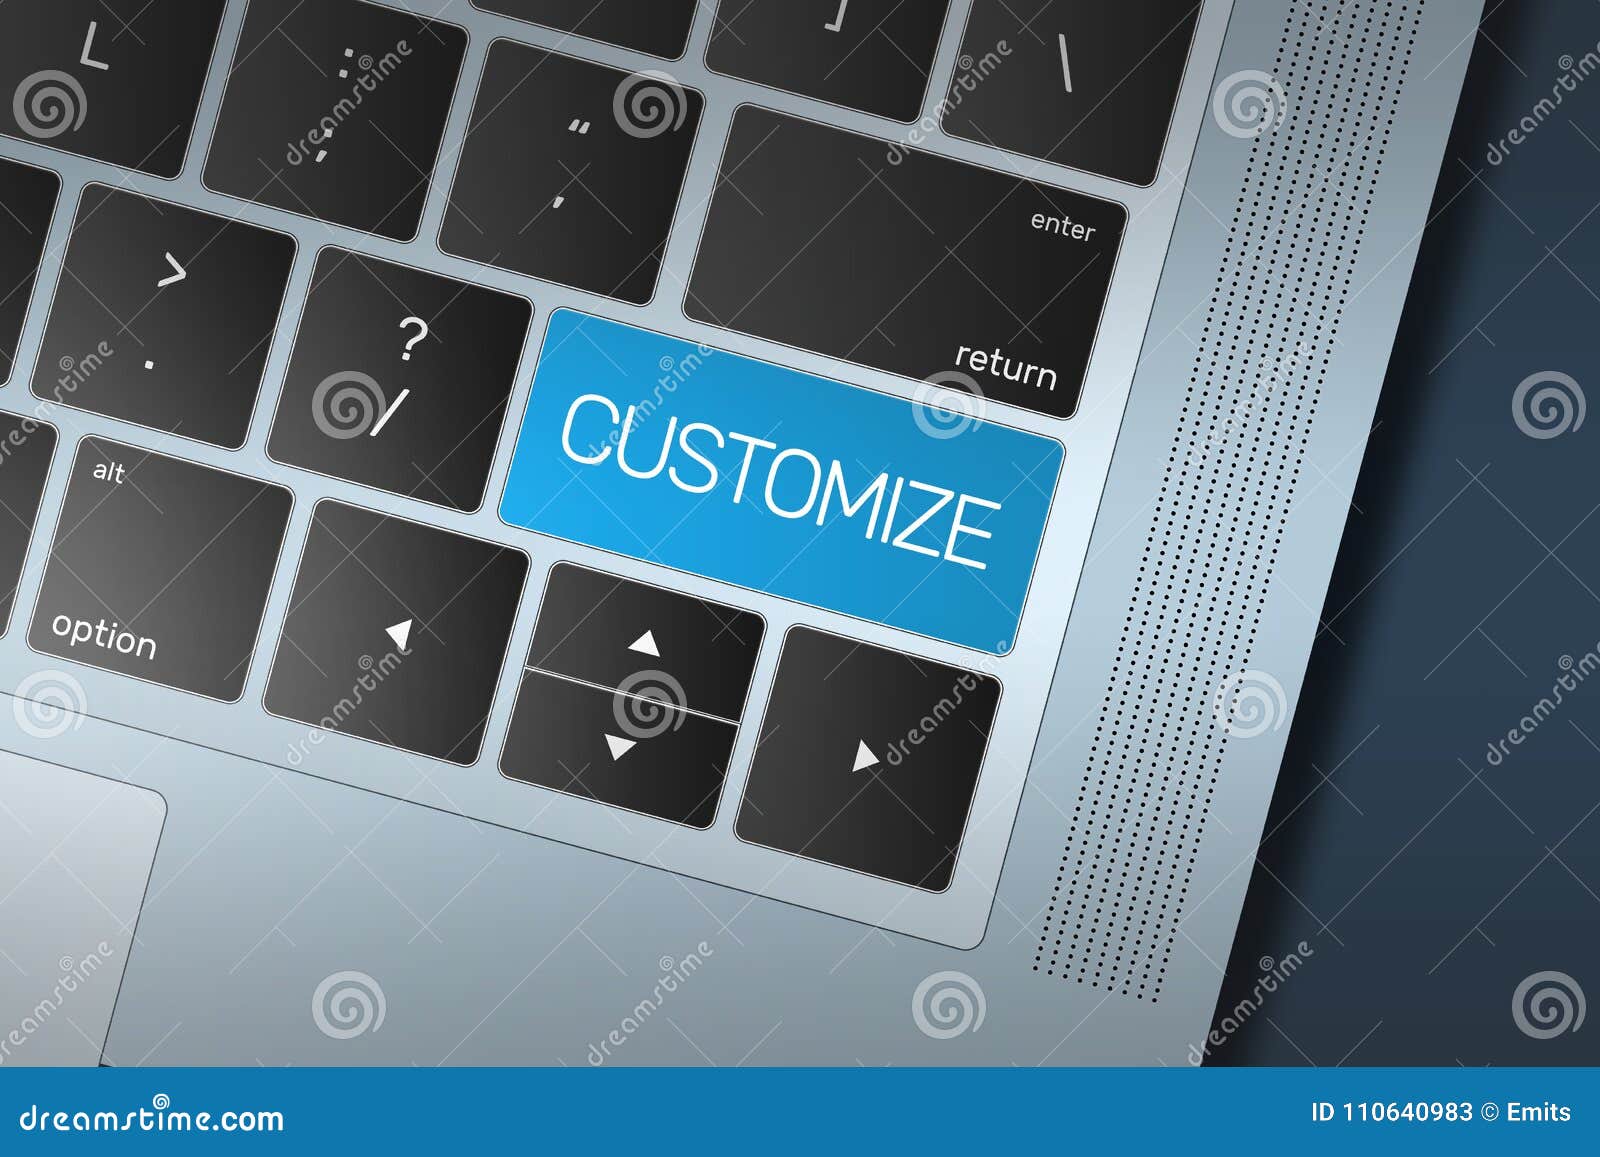 blue customize call to action button on a black and silver keyboard